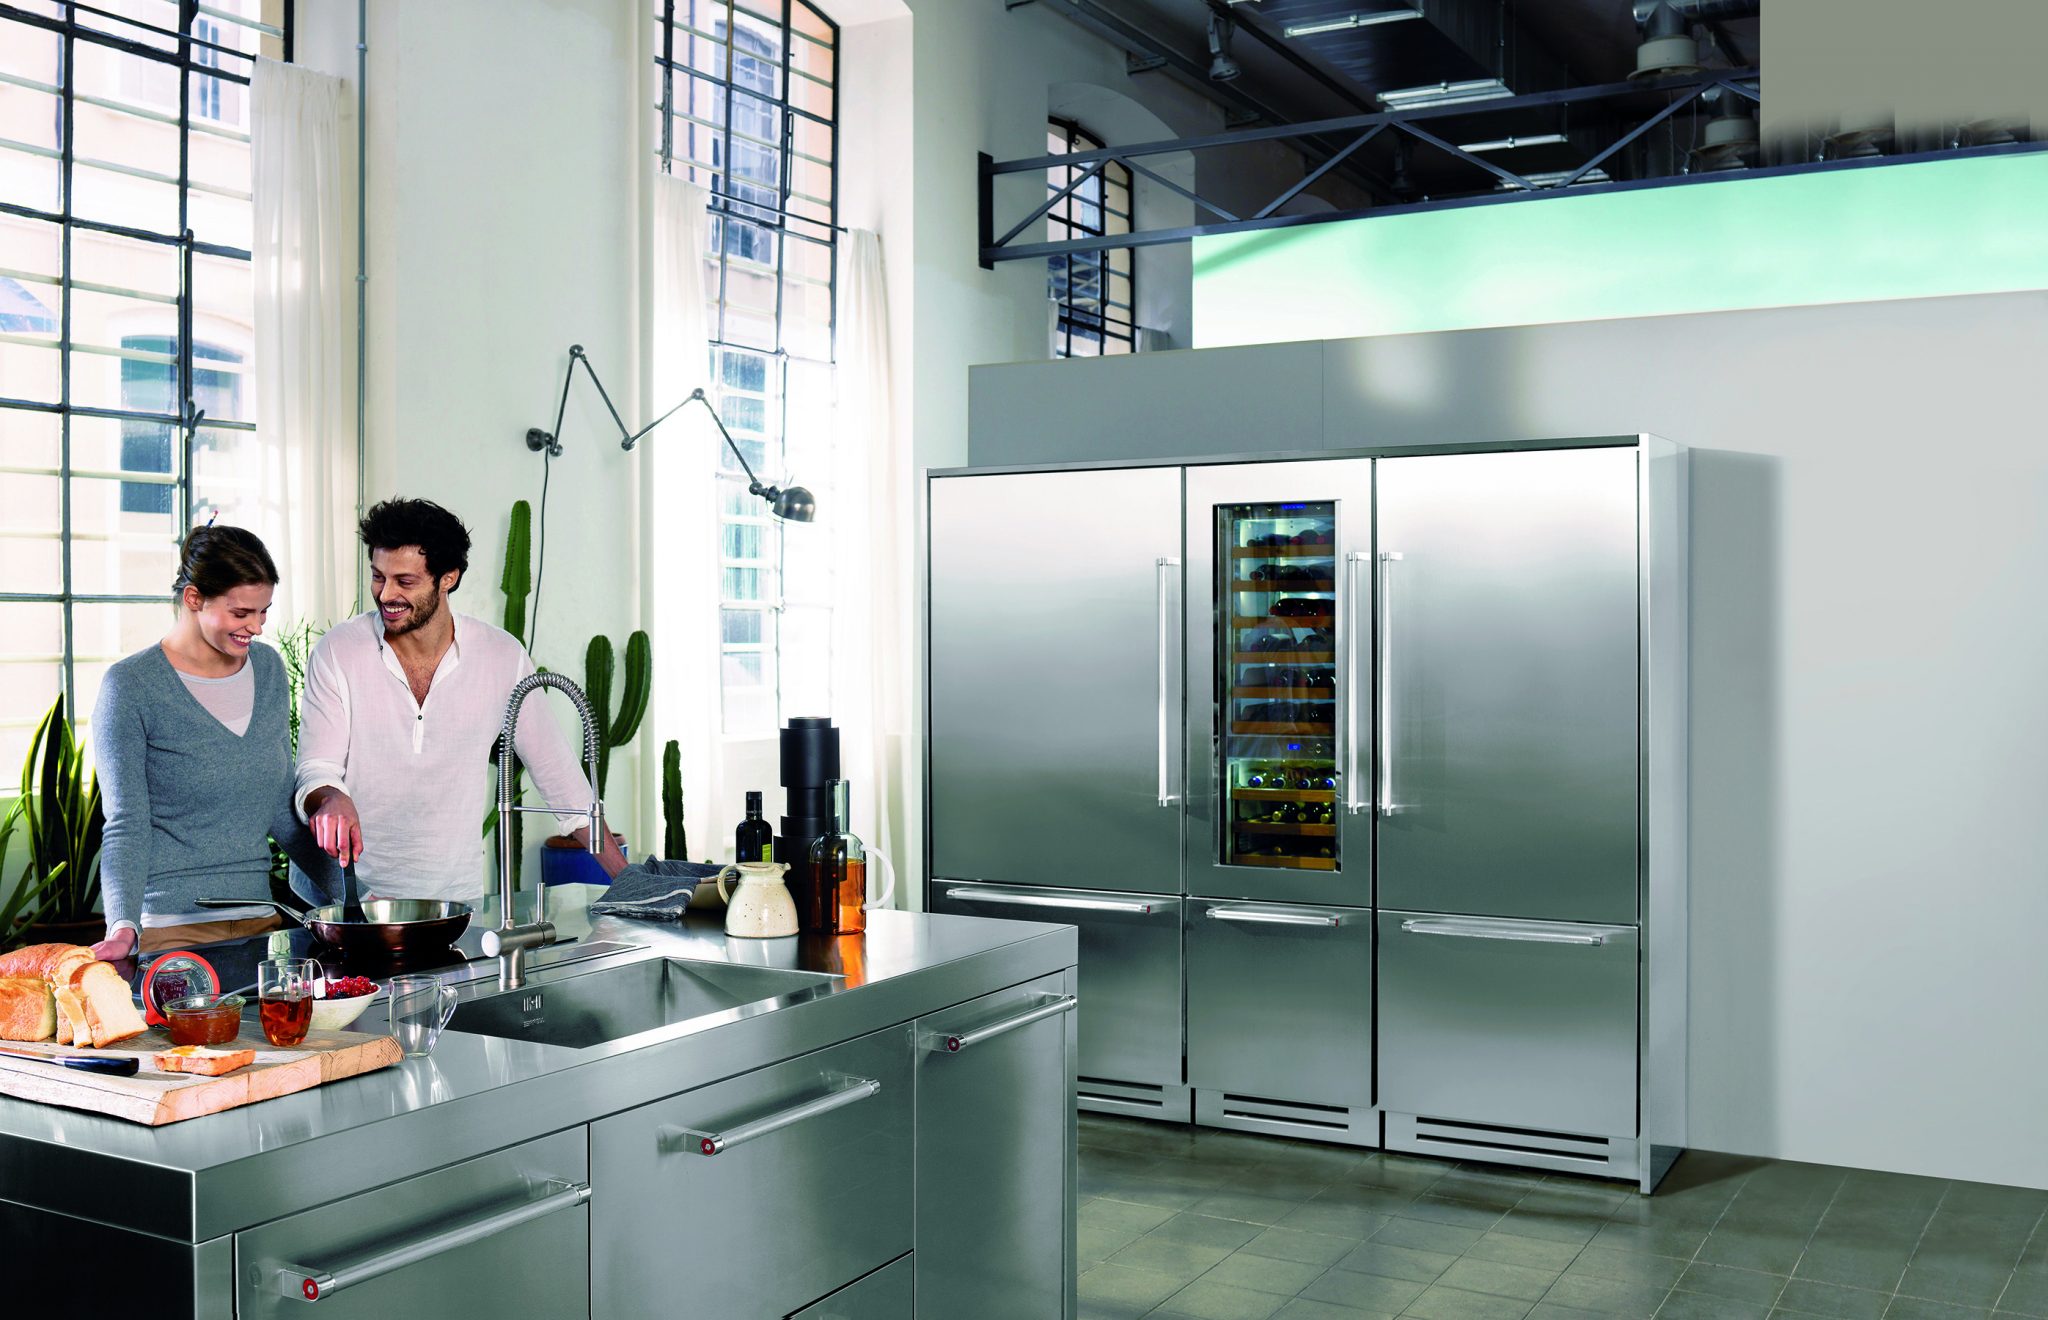 KITCHENAID PRESENTS THE NEW COOLING RANGE AT EUROCUCINA: PERFECTLY PRESERVED FOOD AND DRINK FOR GOURMET DINING EXPERIENCES